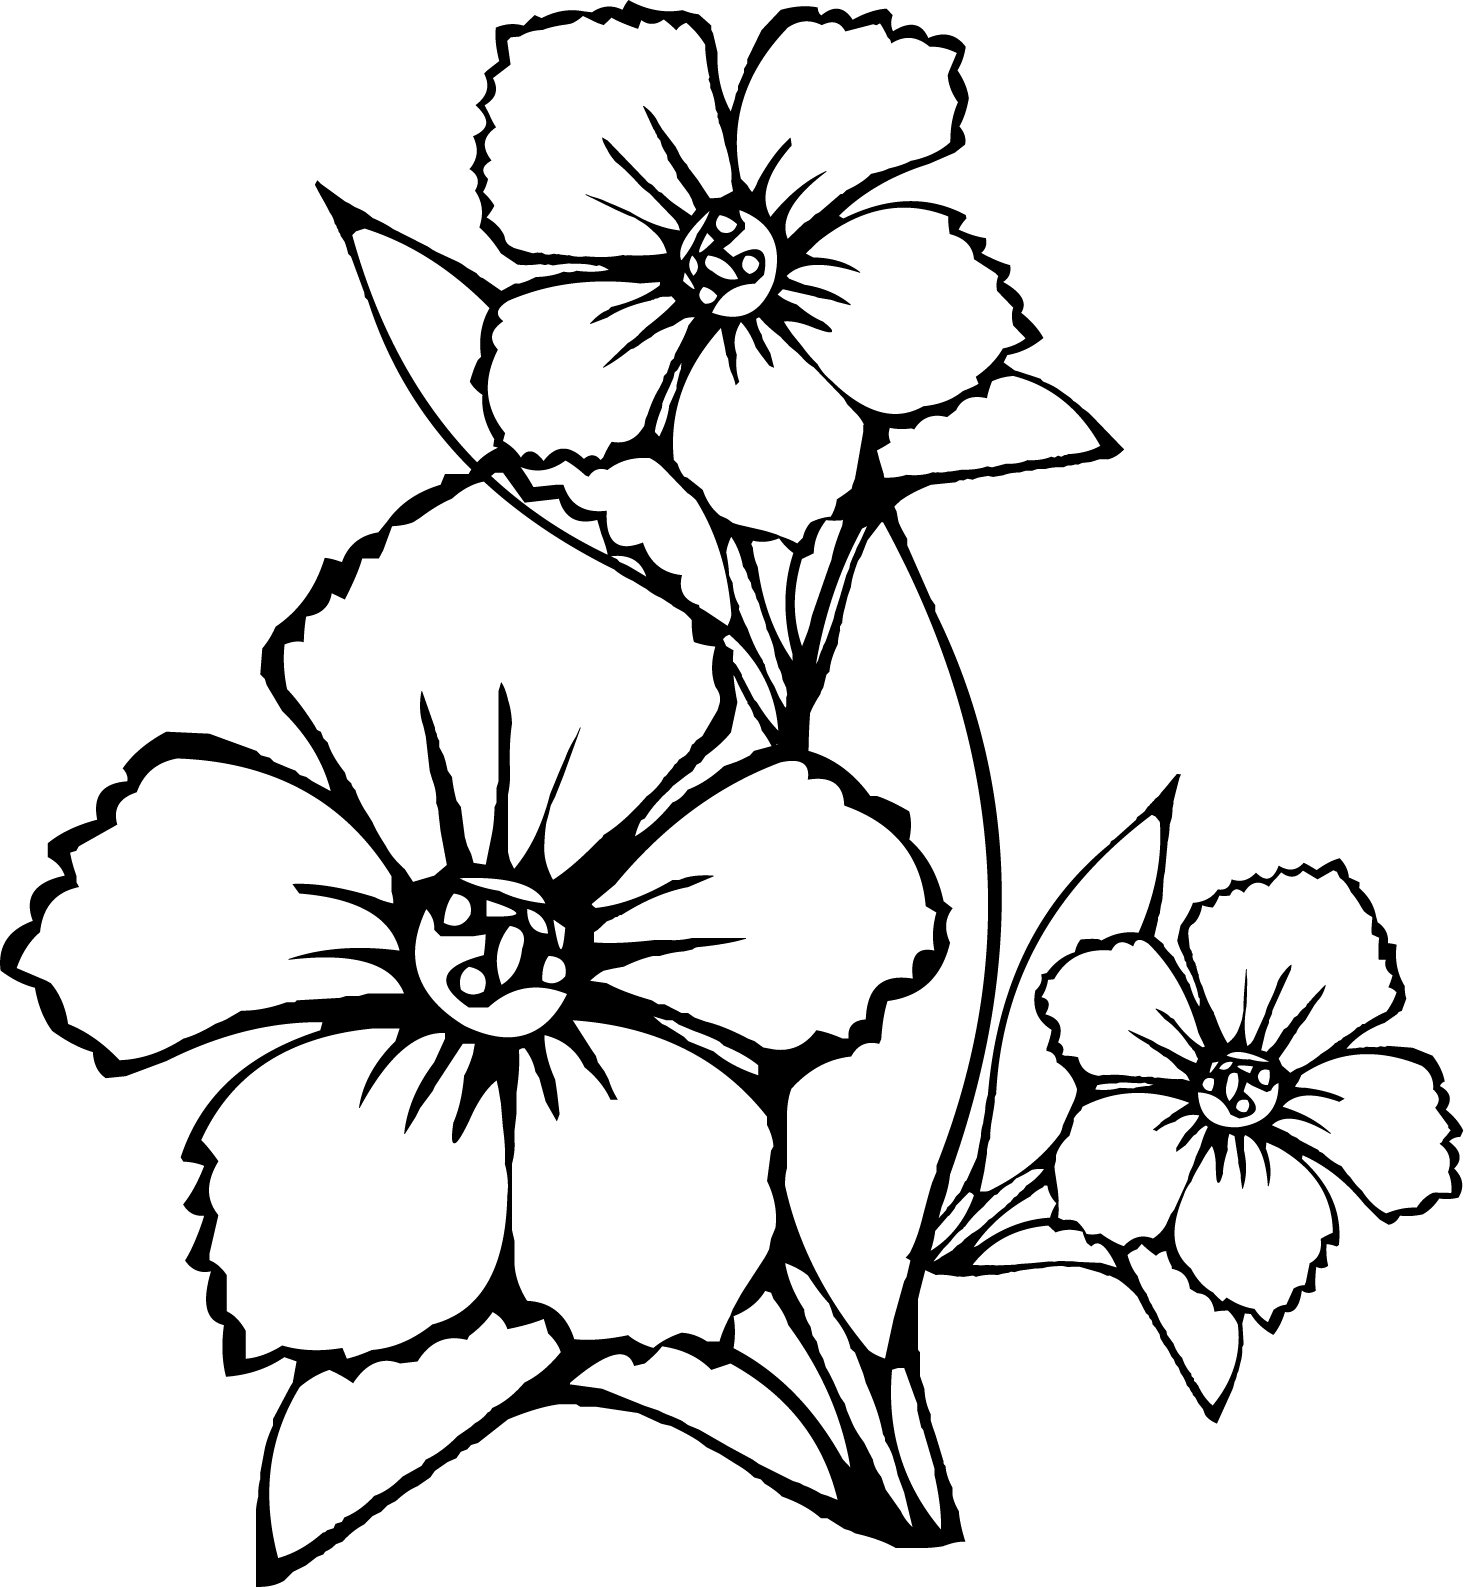 Beautiful Flower Coloring Pages To Print   Coloring Pages For All ...